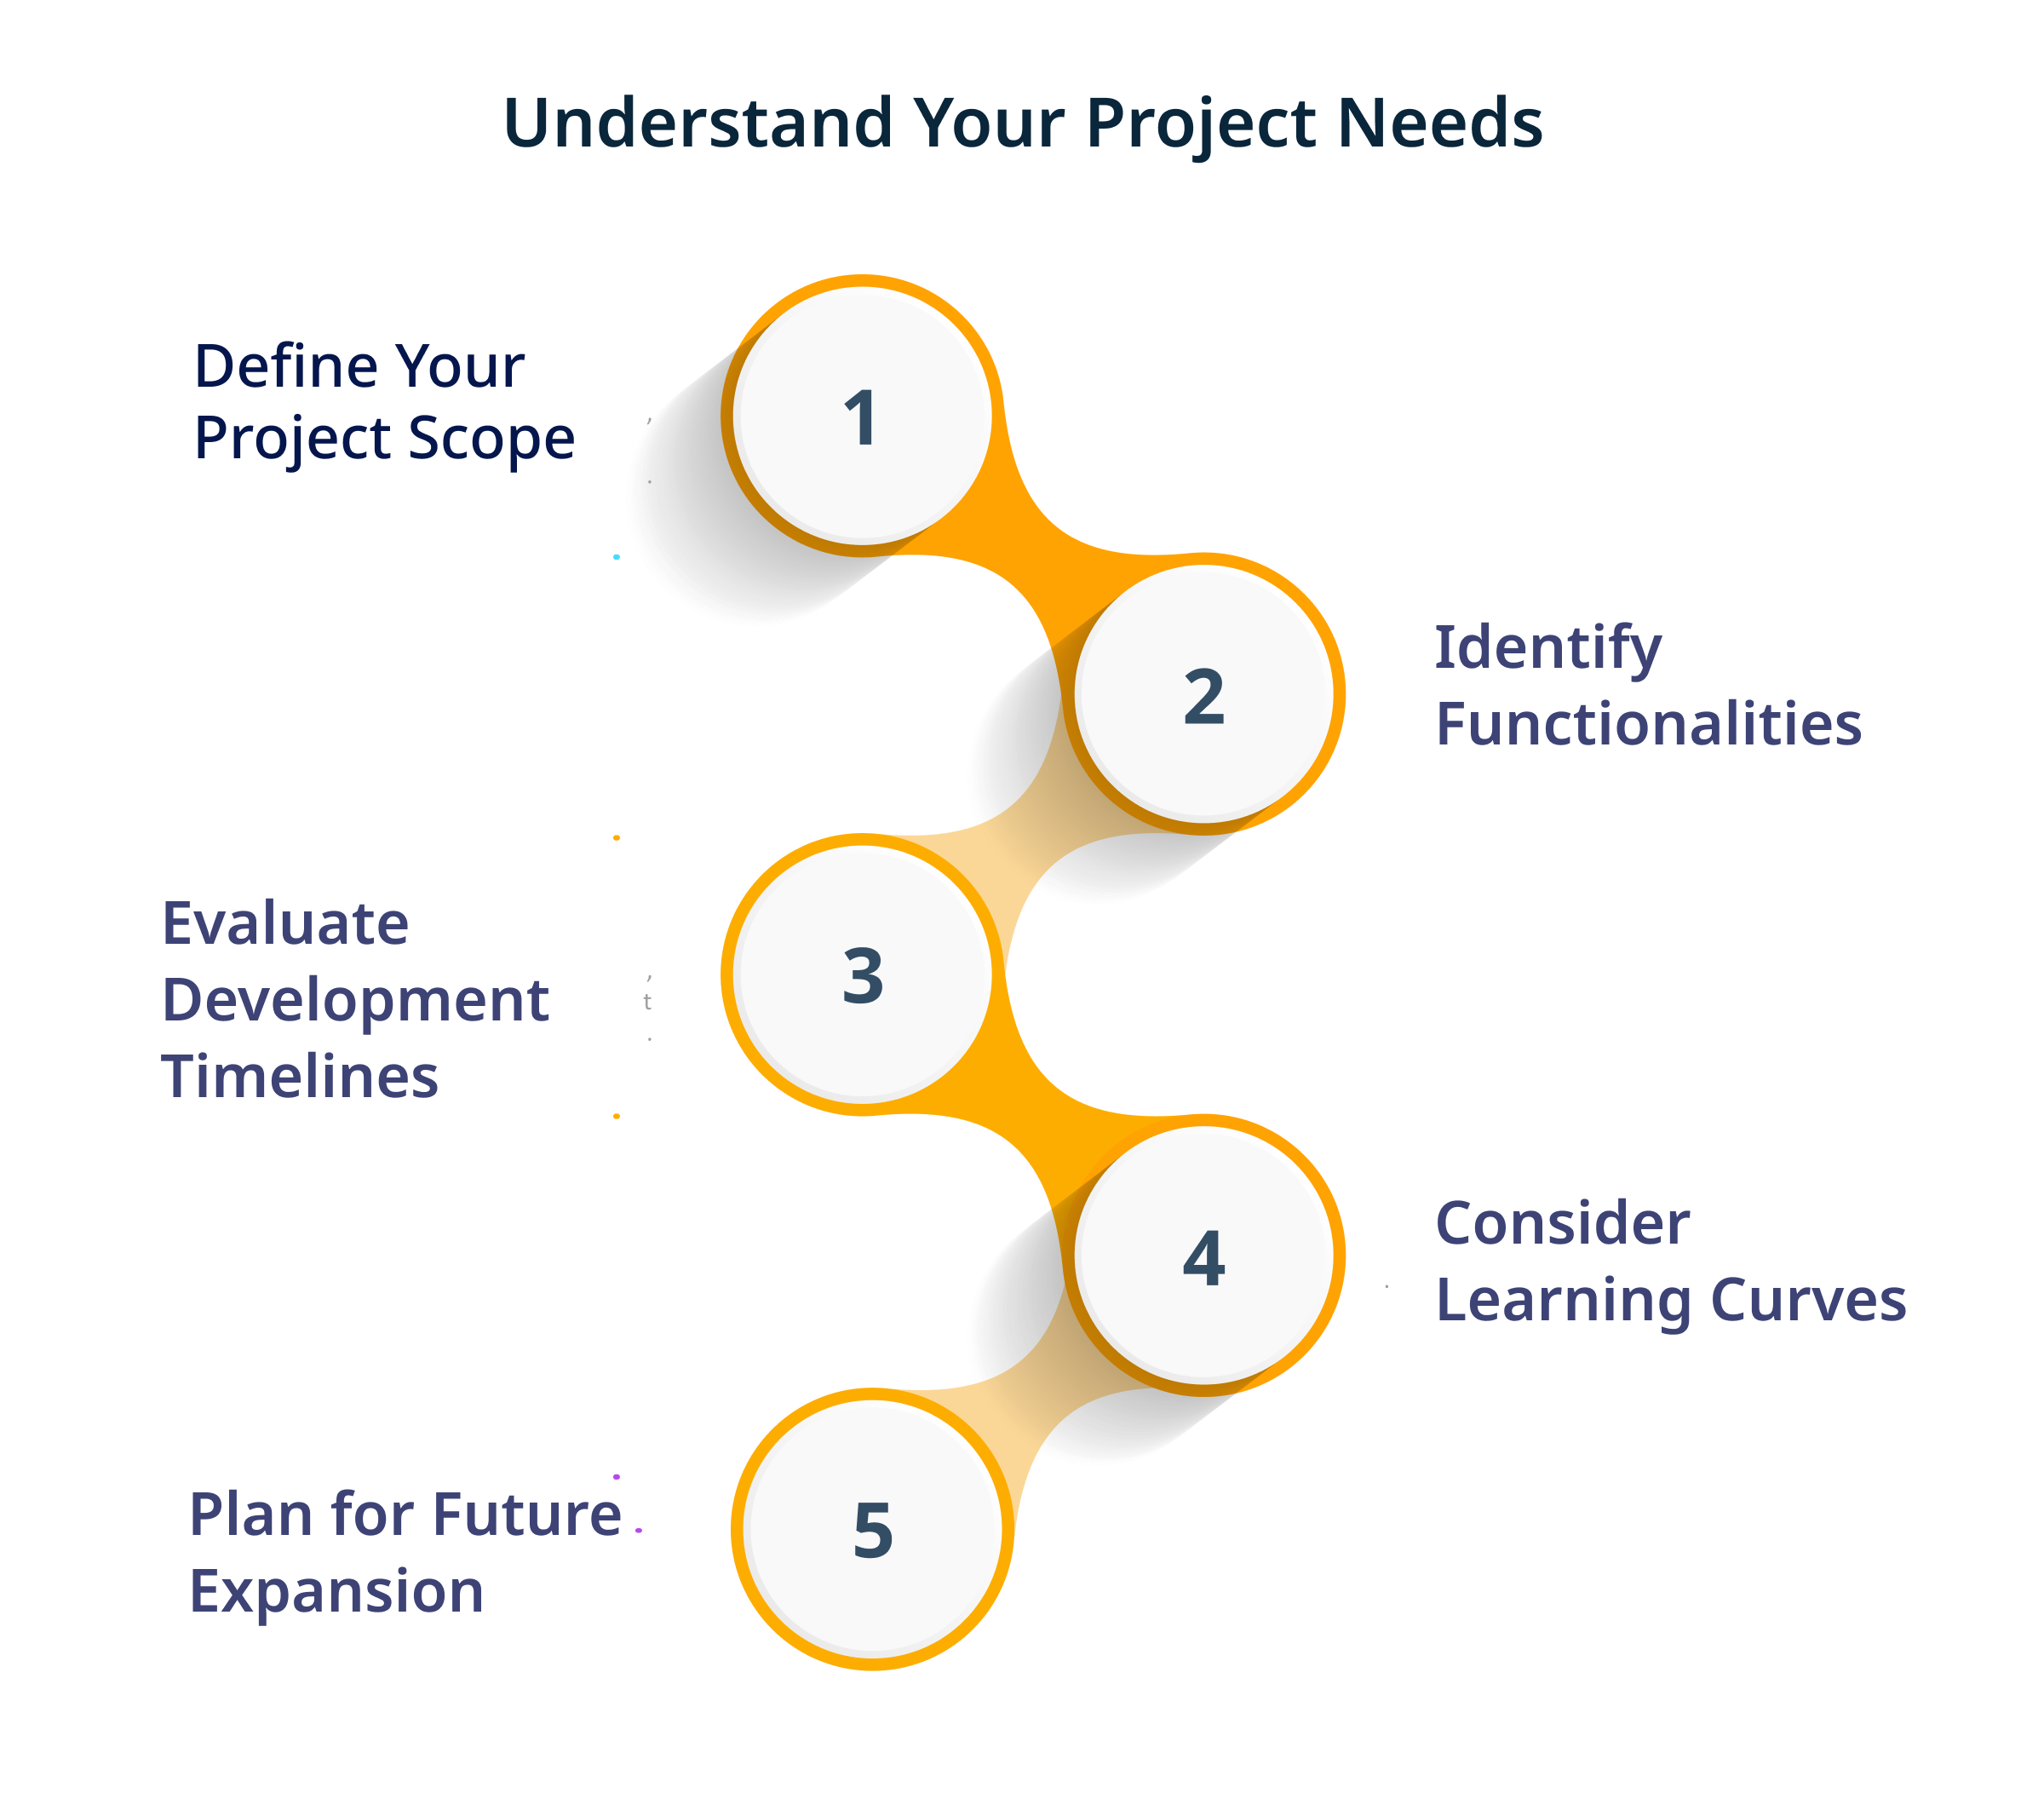 Understands your project need